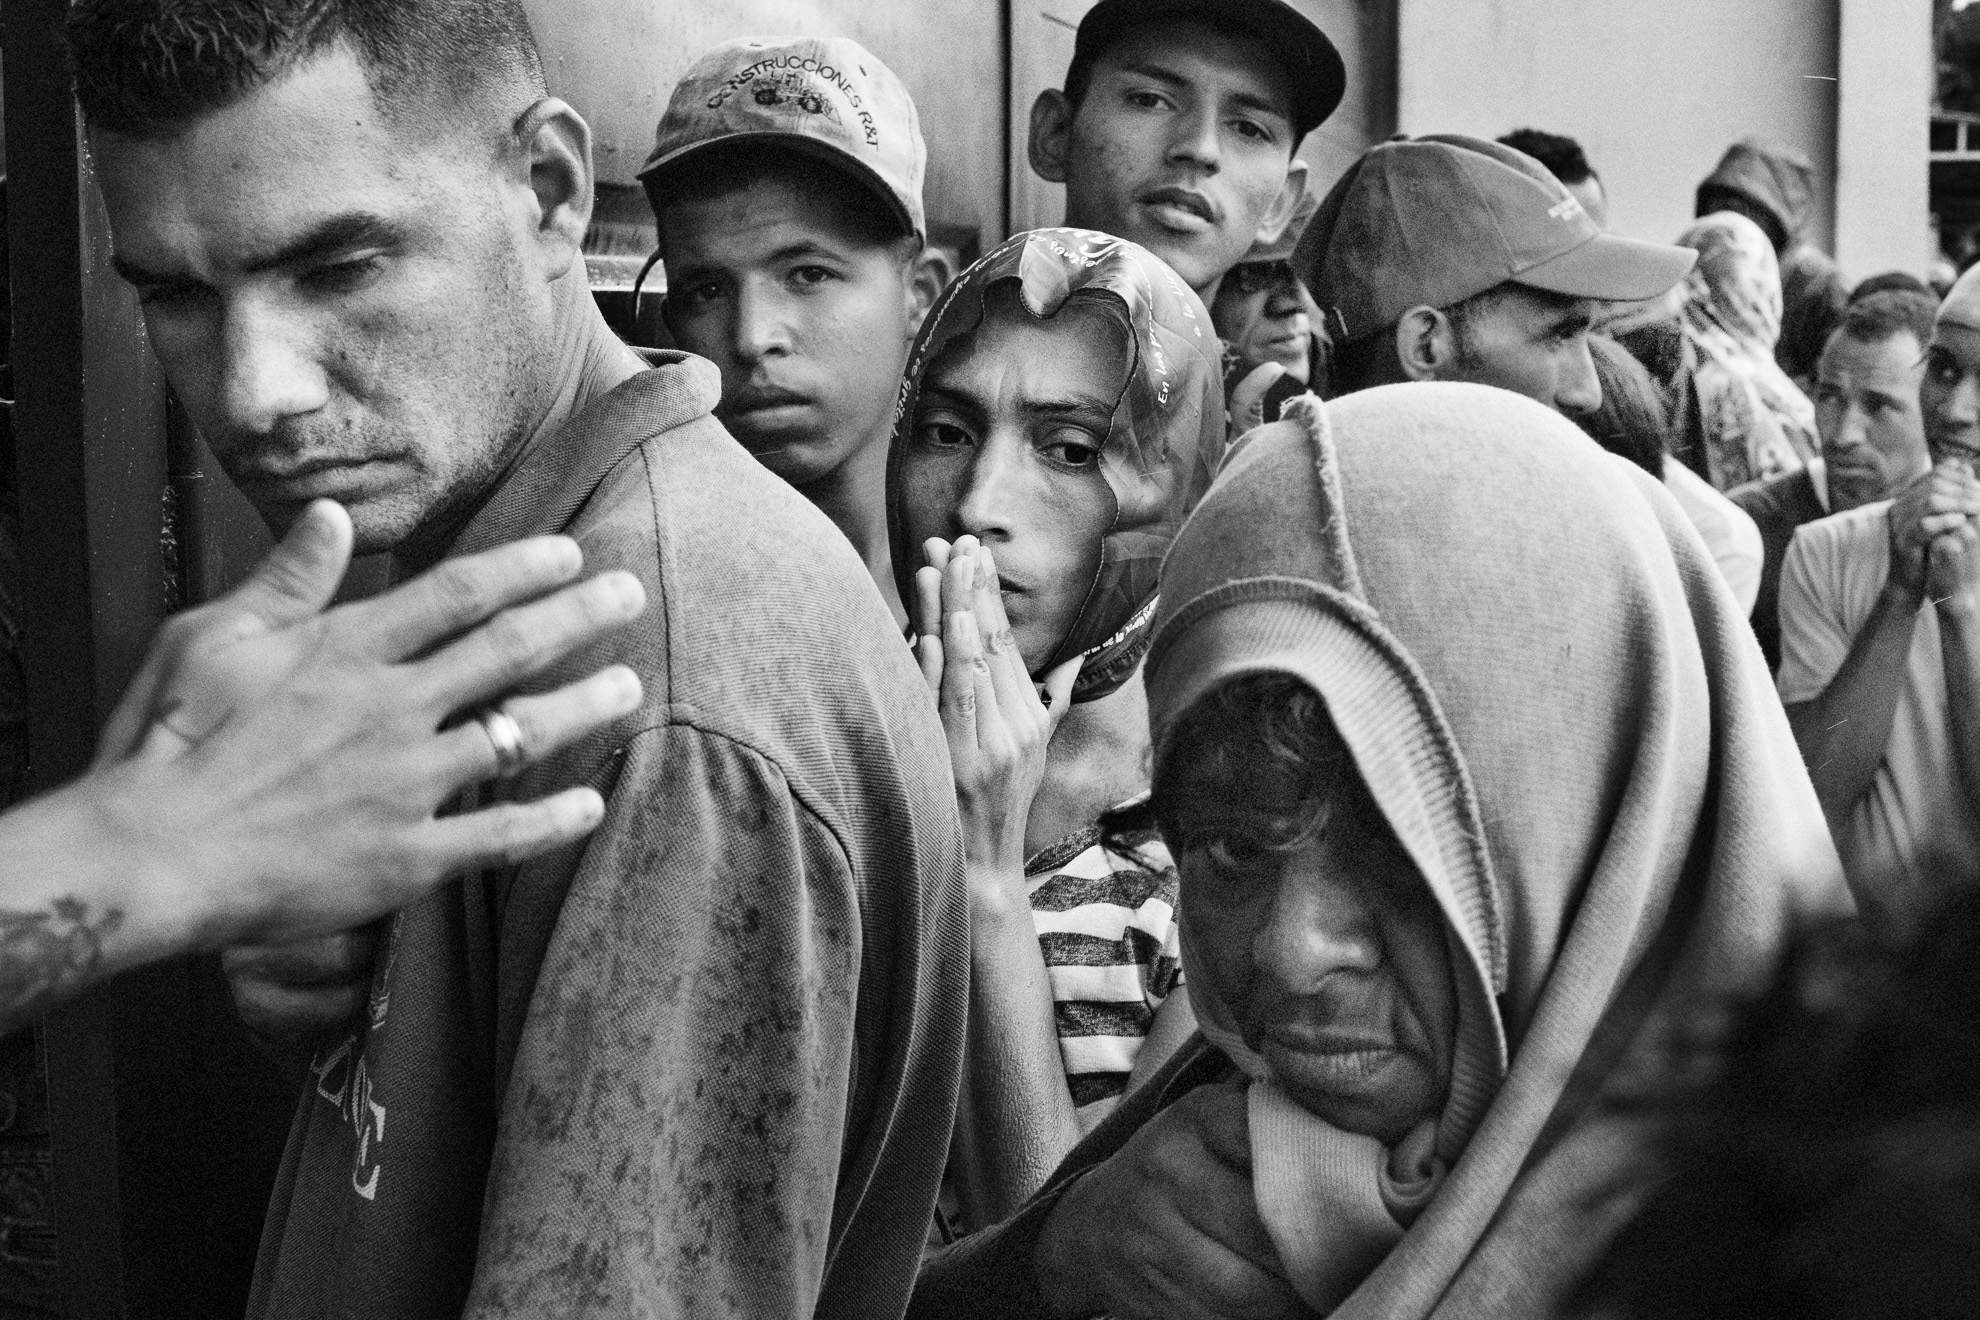 People wait in line for a free meal at a church charity organization, in Villa del Rosario, Colombia. Since March, as a lockdown to prevent contagion was imposed in Colombia, community refectories have been closed, making it more difficult for charity organizations to reach the migrants and to offer them free food.